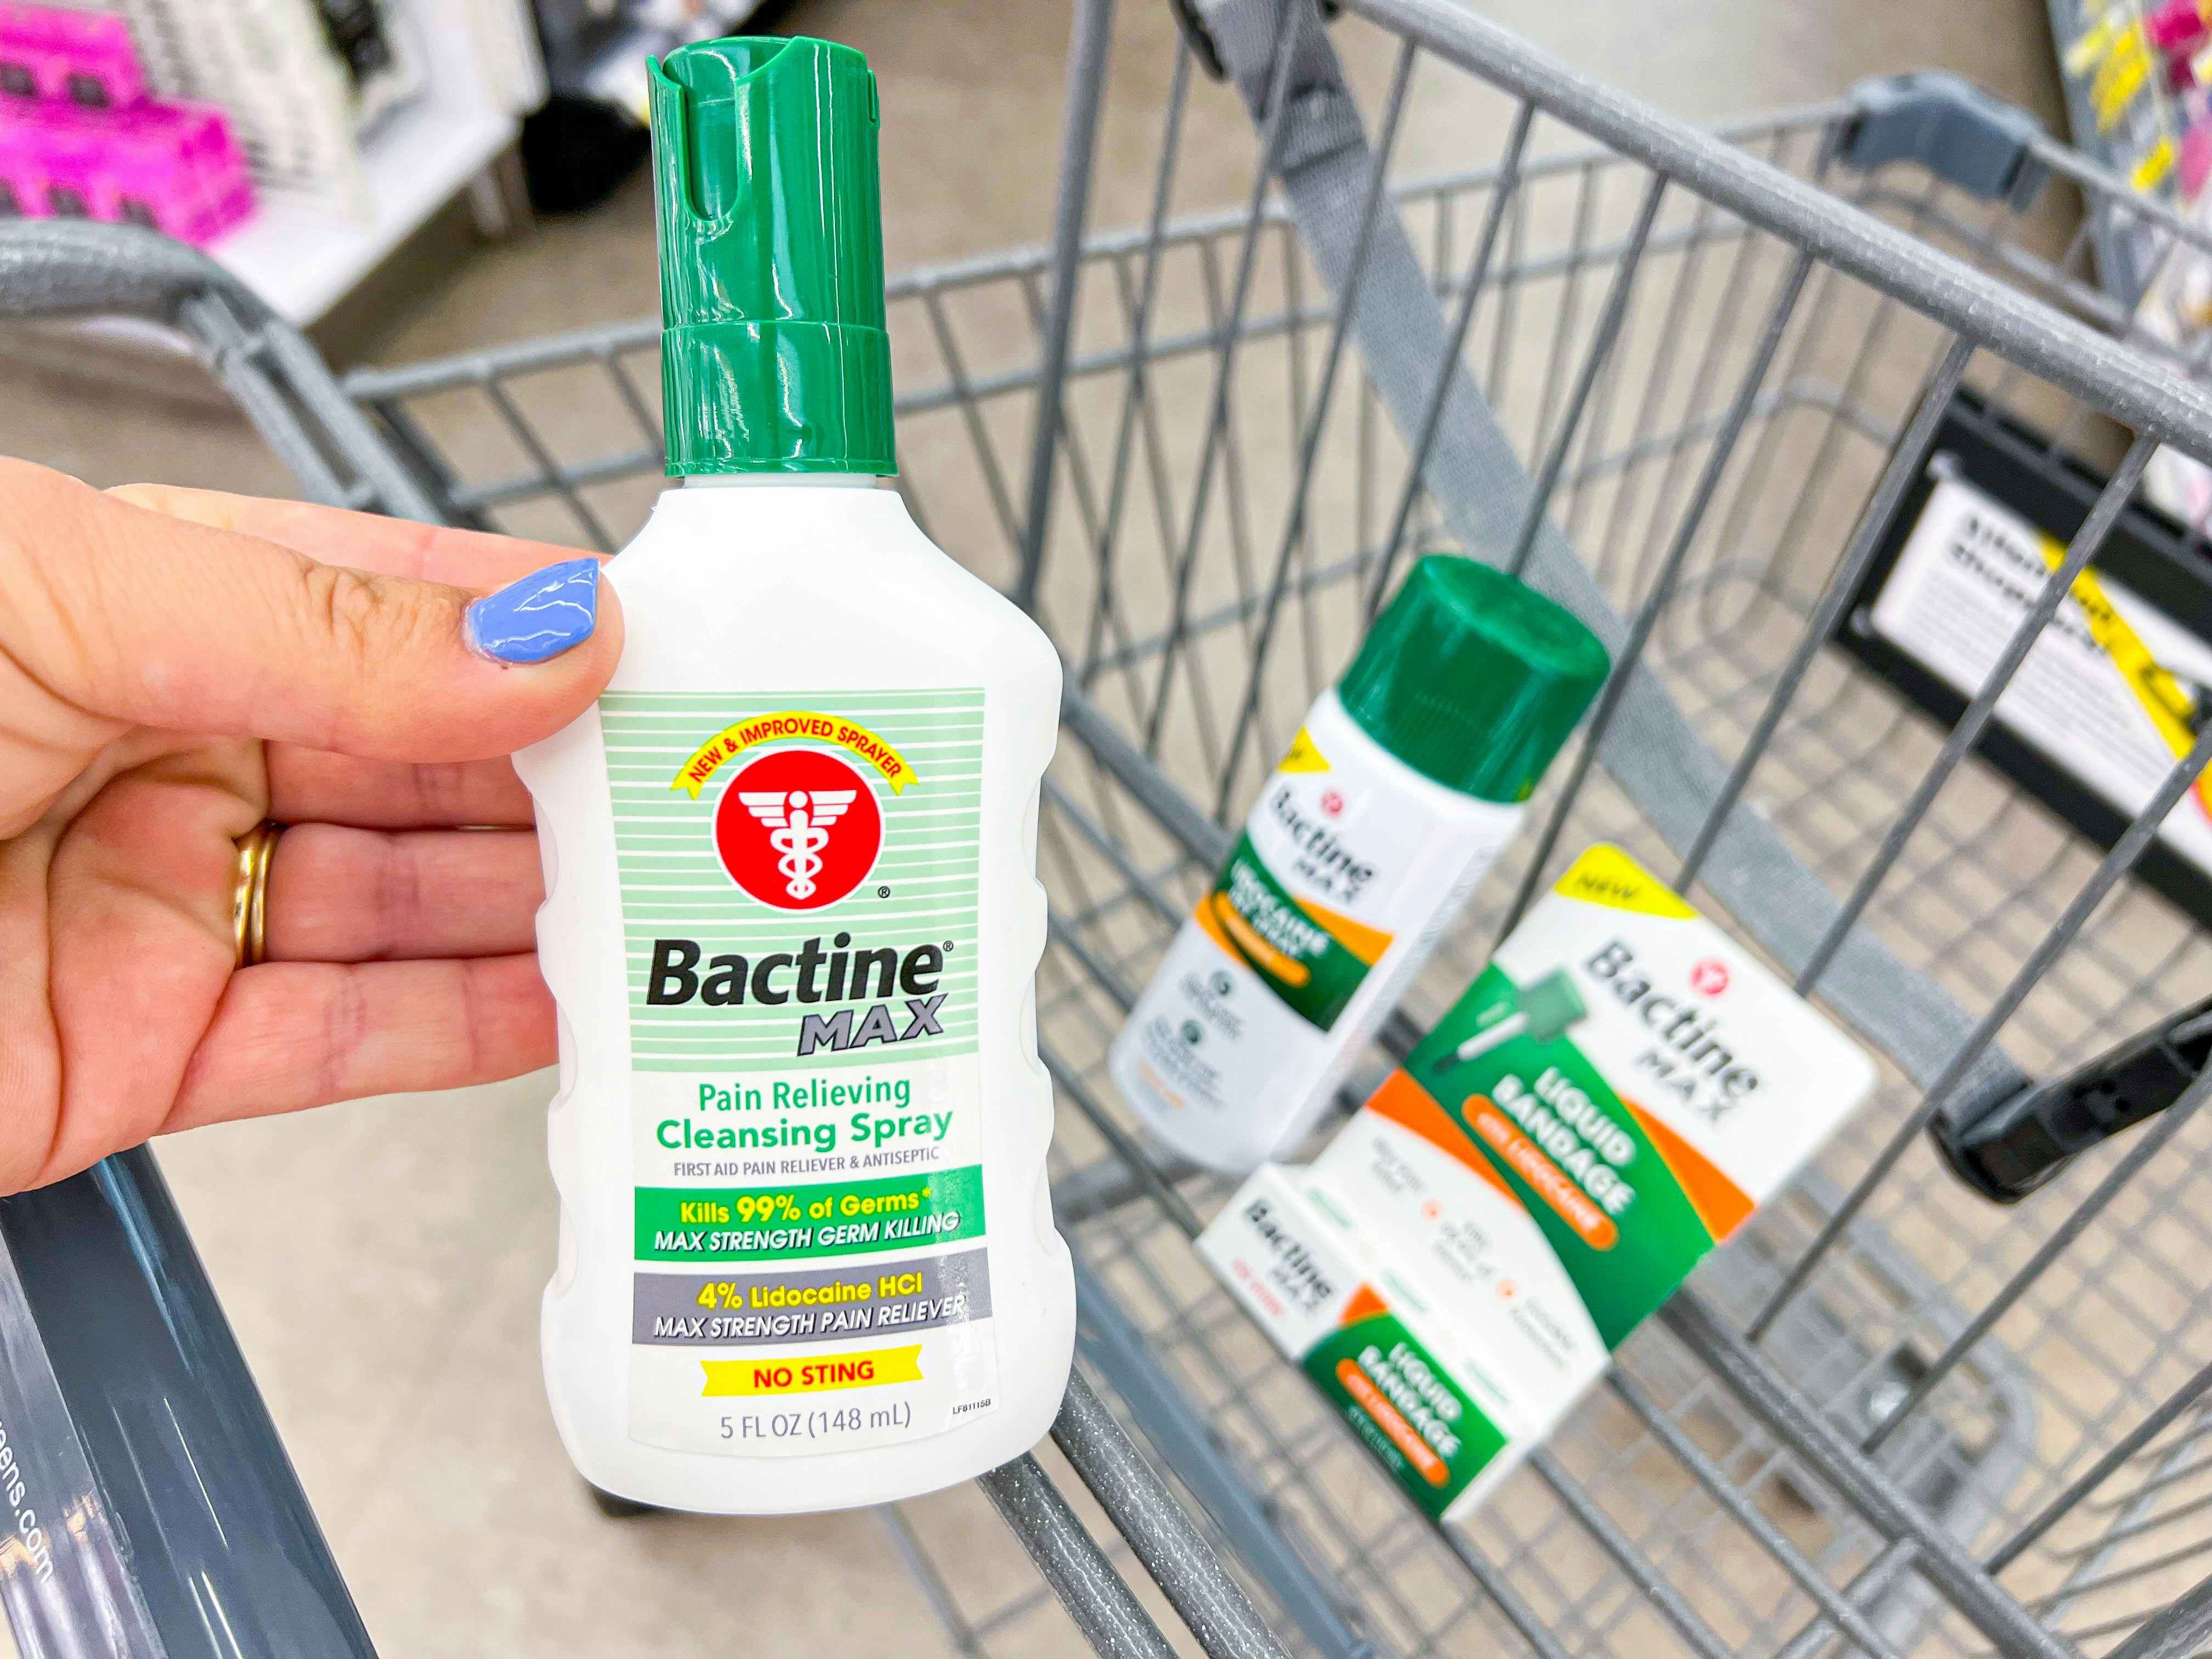 Someone putting Bactine Max products into a Walgreens cart